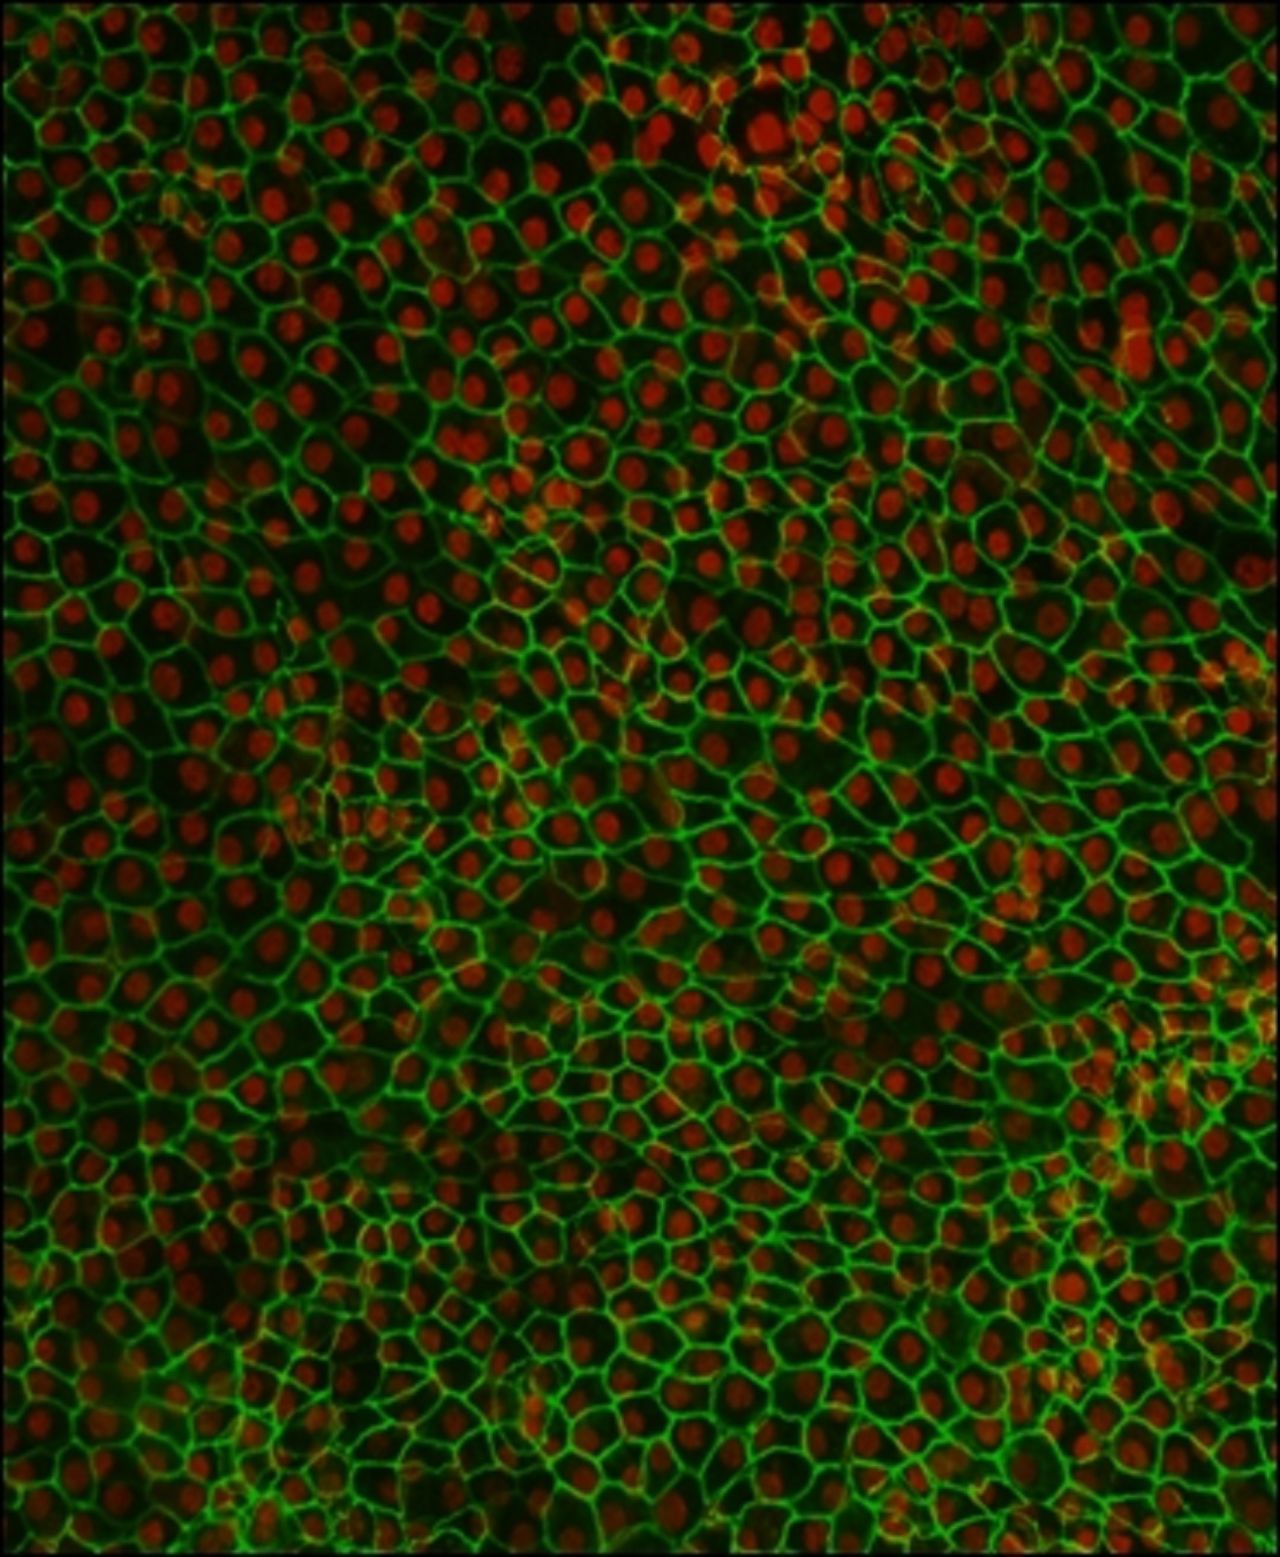 Cells in the eye's Retinal Pigmented Epithelium (REP) support the eye's vision center, the macula. Damage to these cells leads to deterioration of the macula, resulting in AMD. Pictured, retinal pigment epithelium (RPE) cells derived from human embryonic stem cells. 